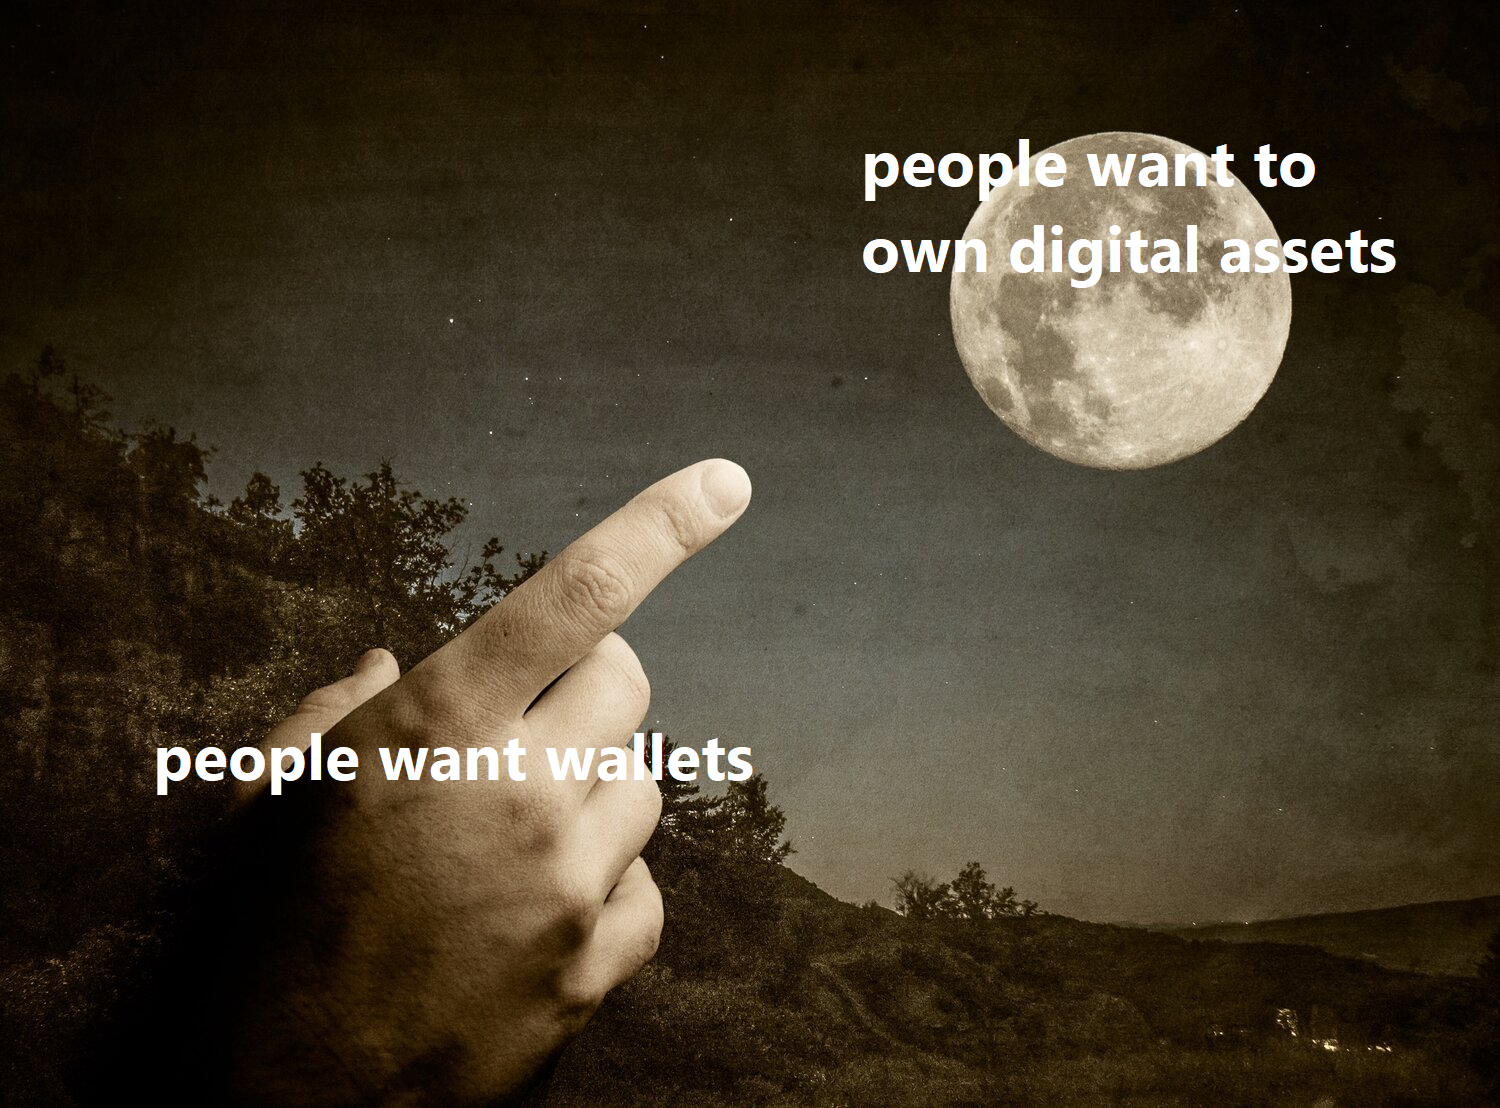 You need a wallet to own digital assets. People want digital assets. Yet people don't want wallets